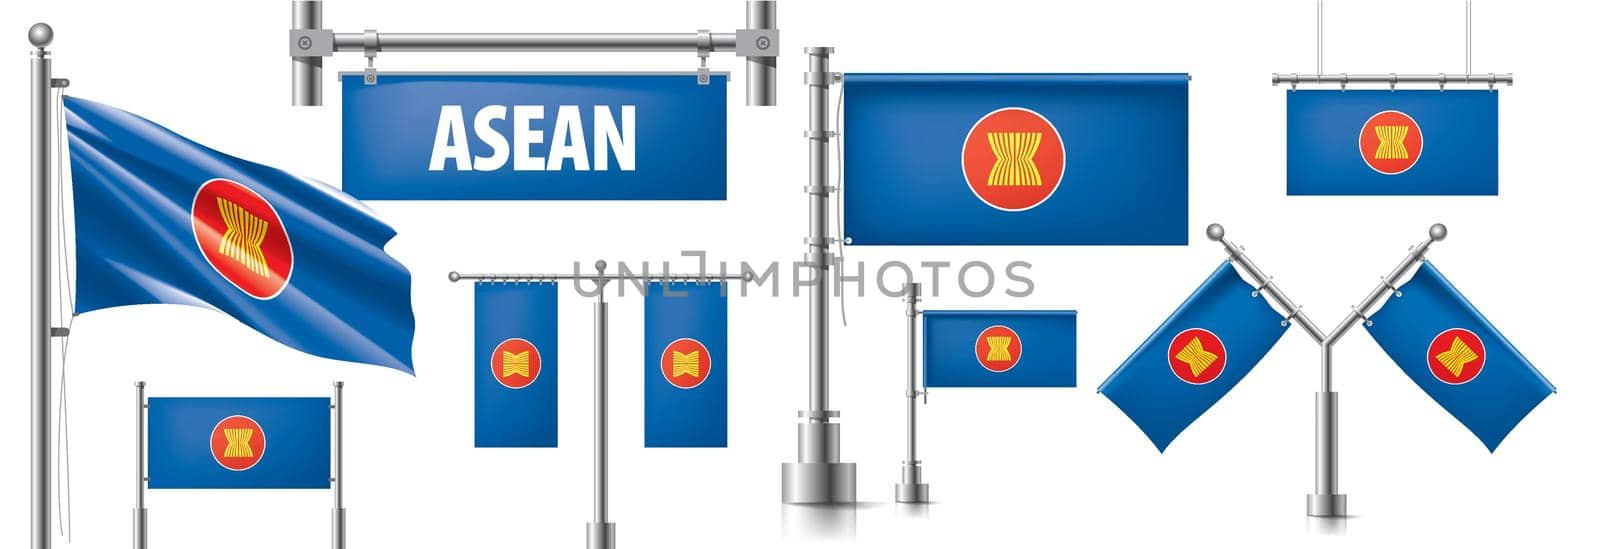 Vector set of the national flag of ASEAN in various creative designs.